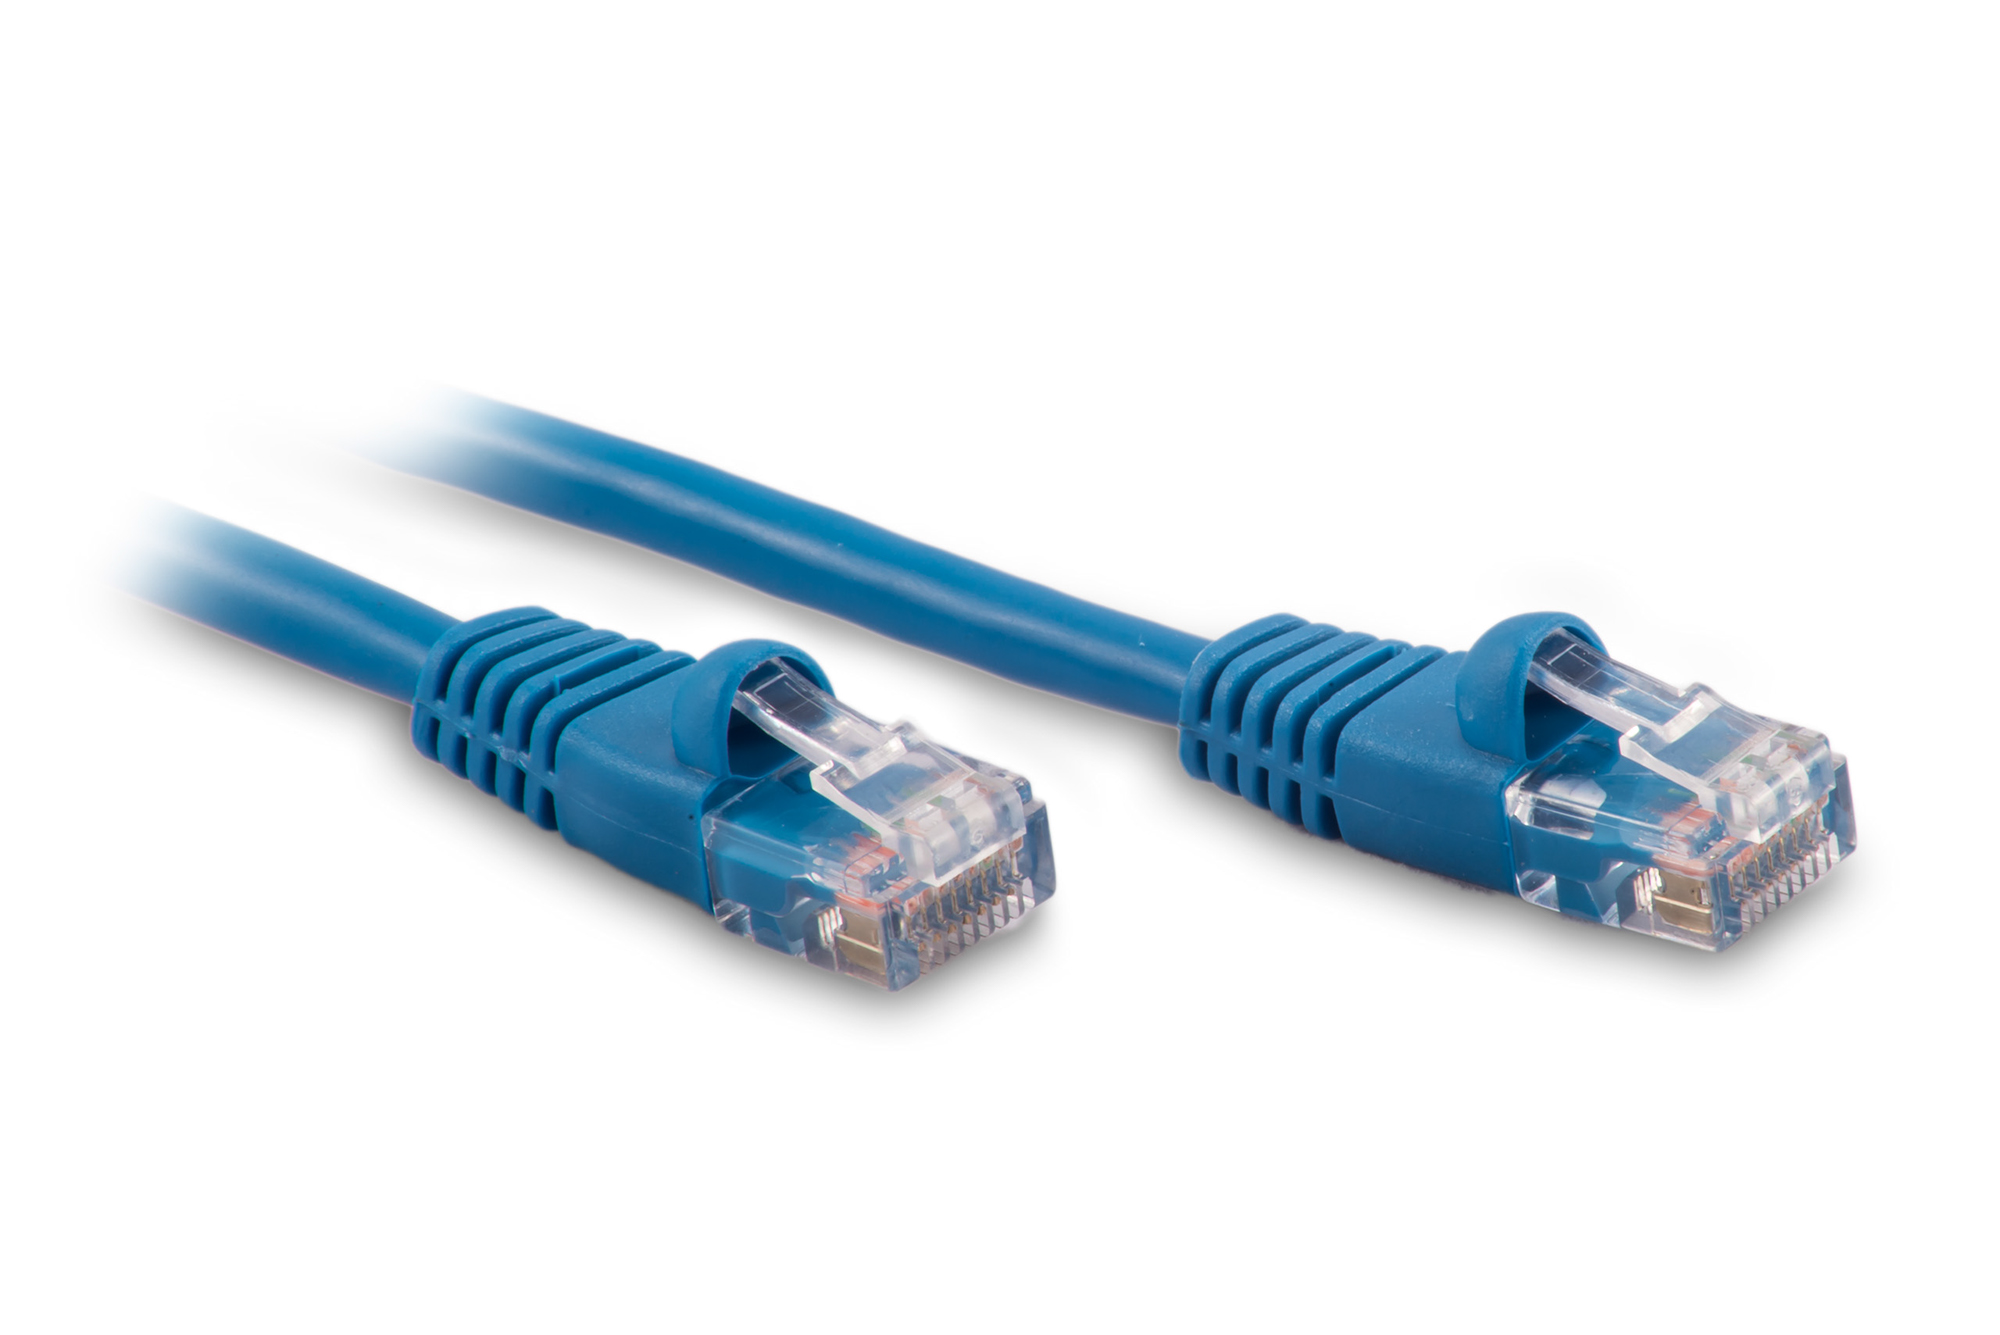 25ft Cat6 Ethernet Patch Cable - Blue Color - Snagless Boot